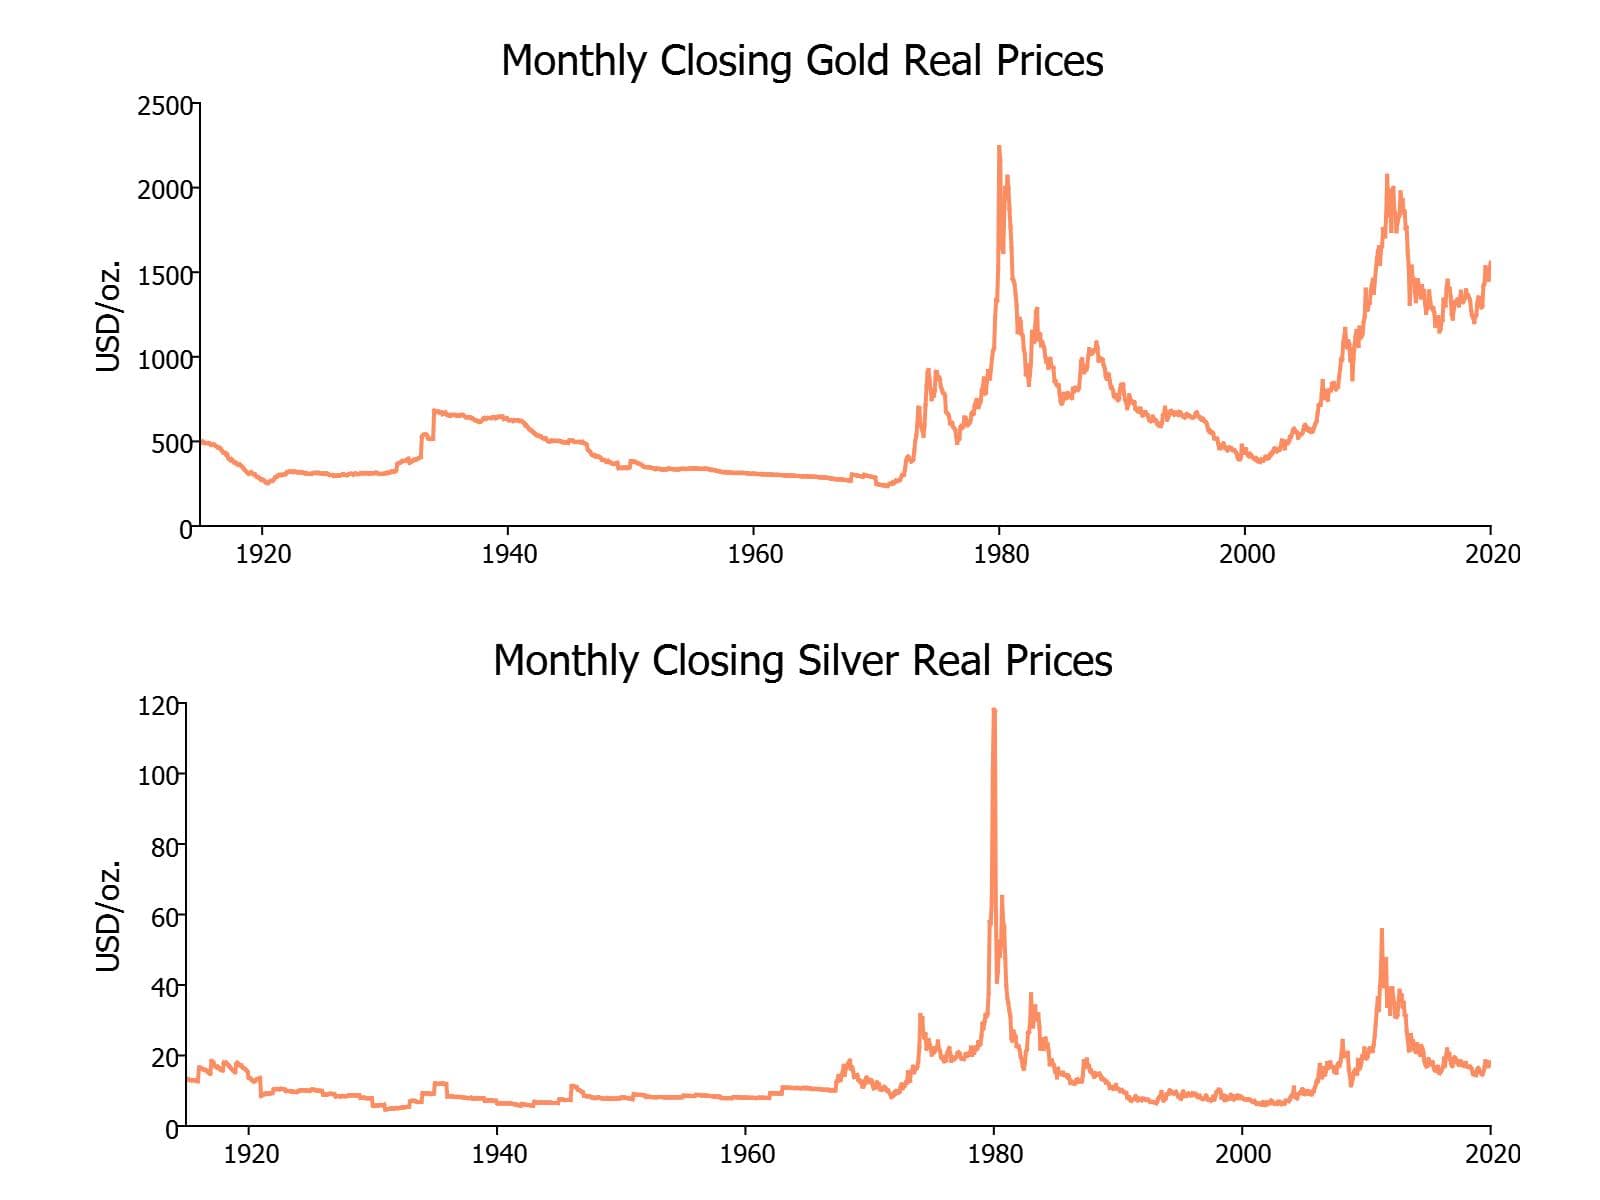 Shows comovements between gold and silver prices since 1915.